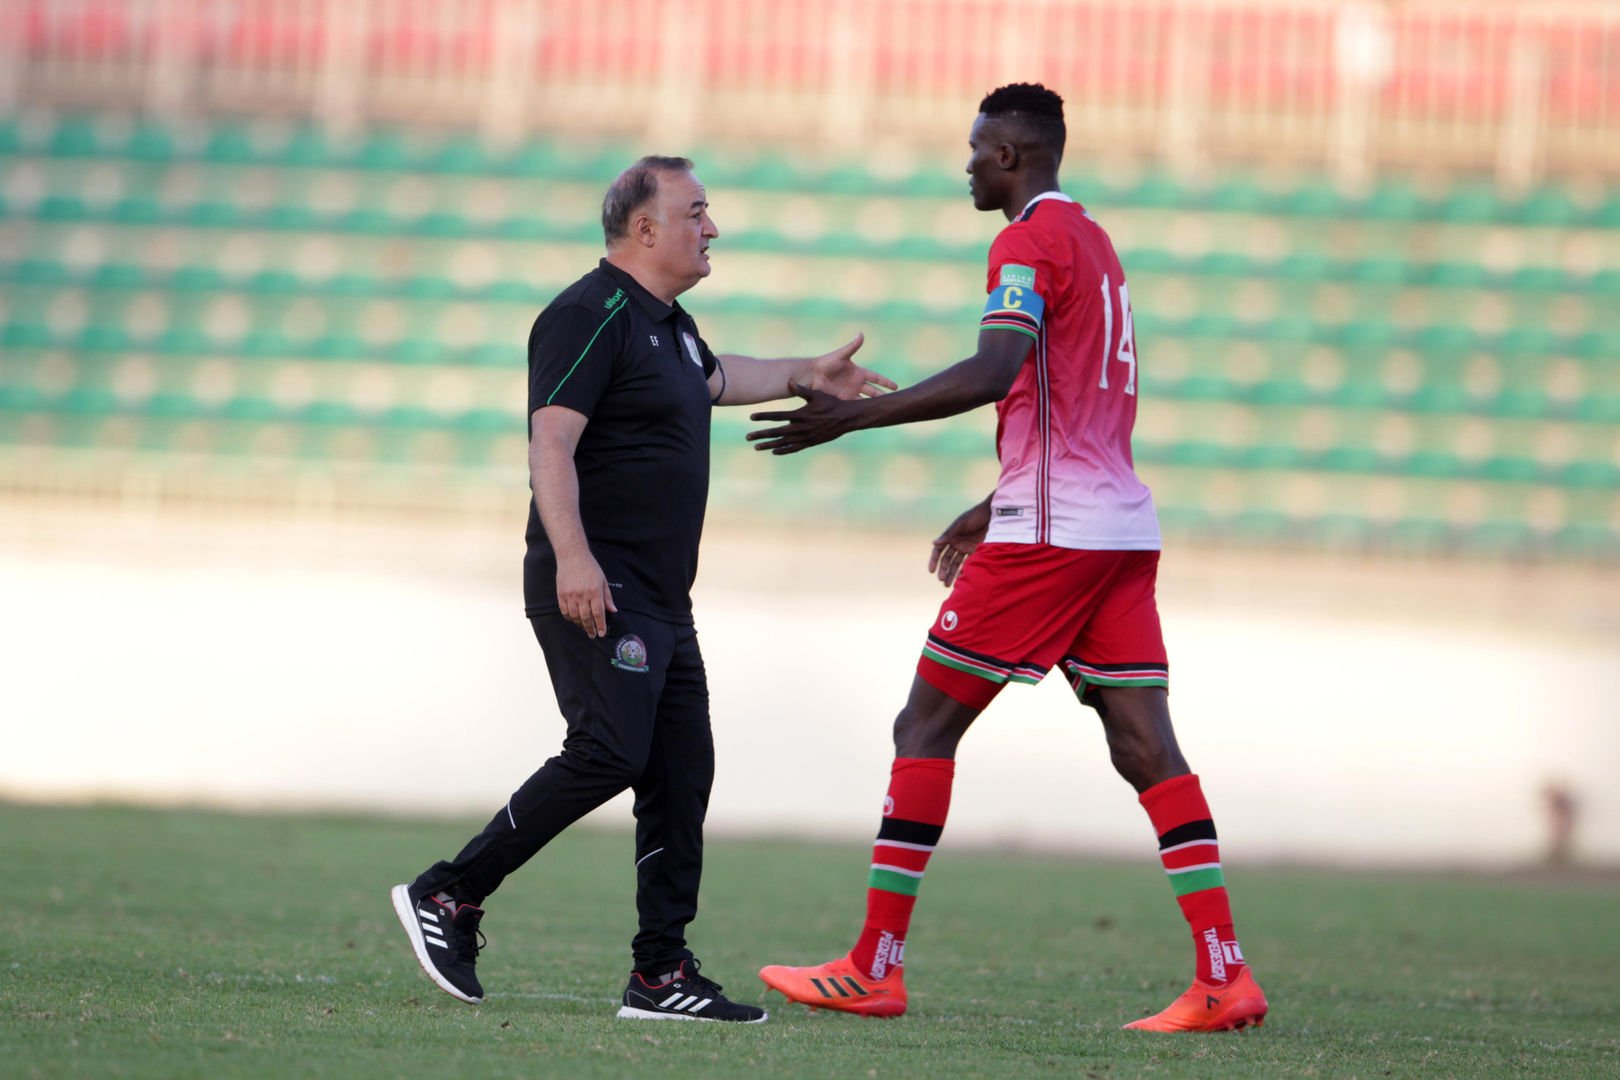 HARAMBEE STARS PLAYERS PREVIEW IRAN FRIENDLY 